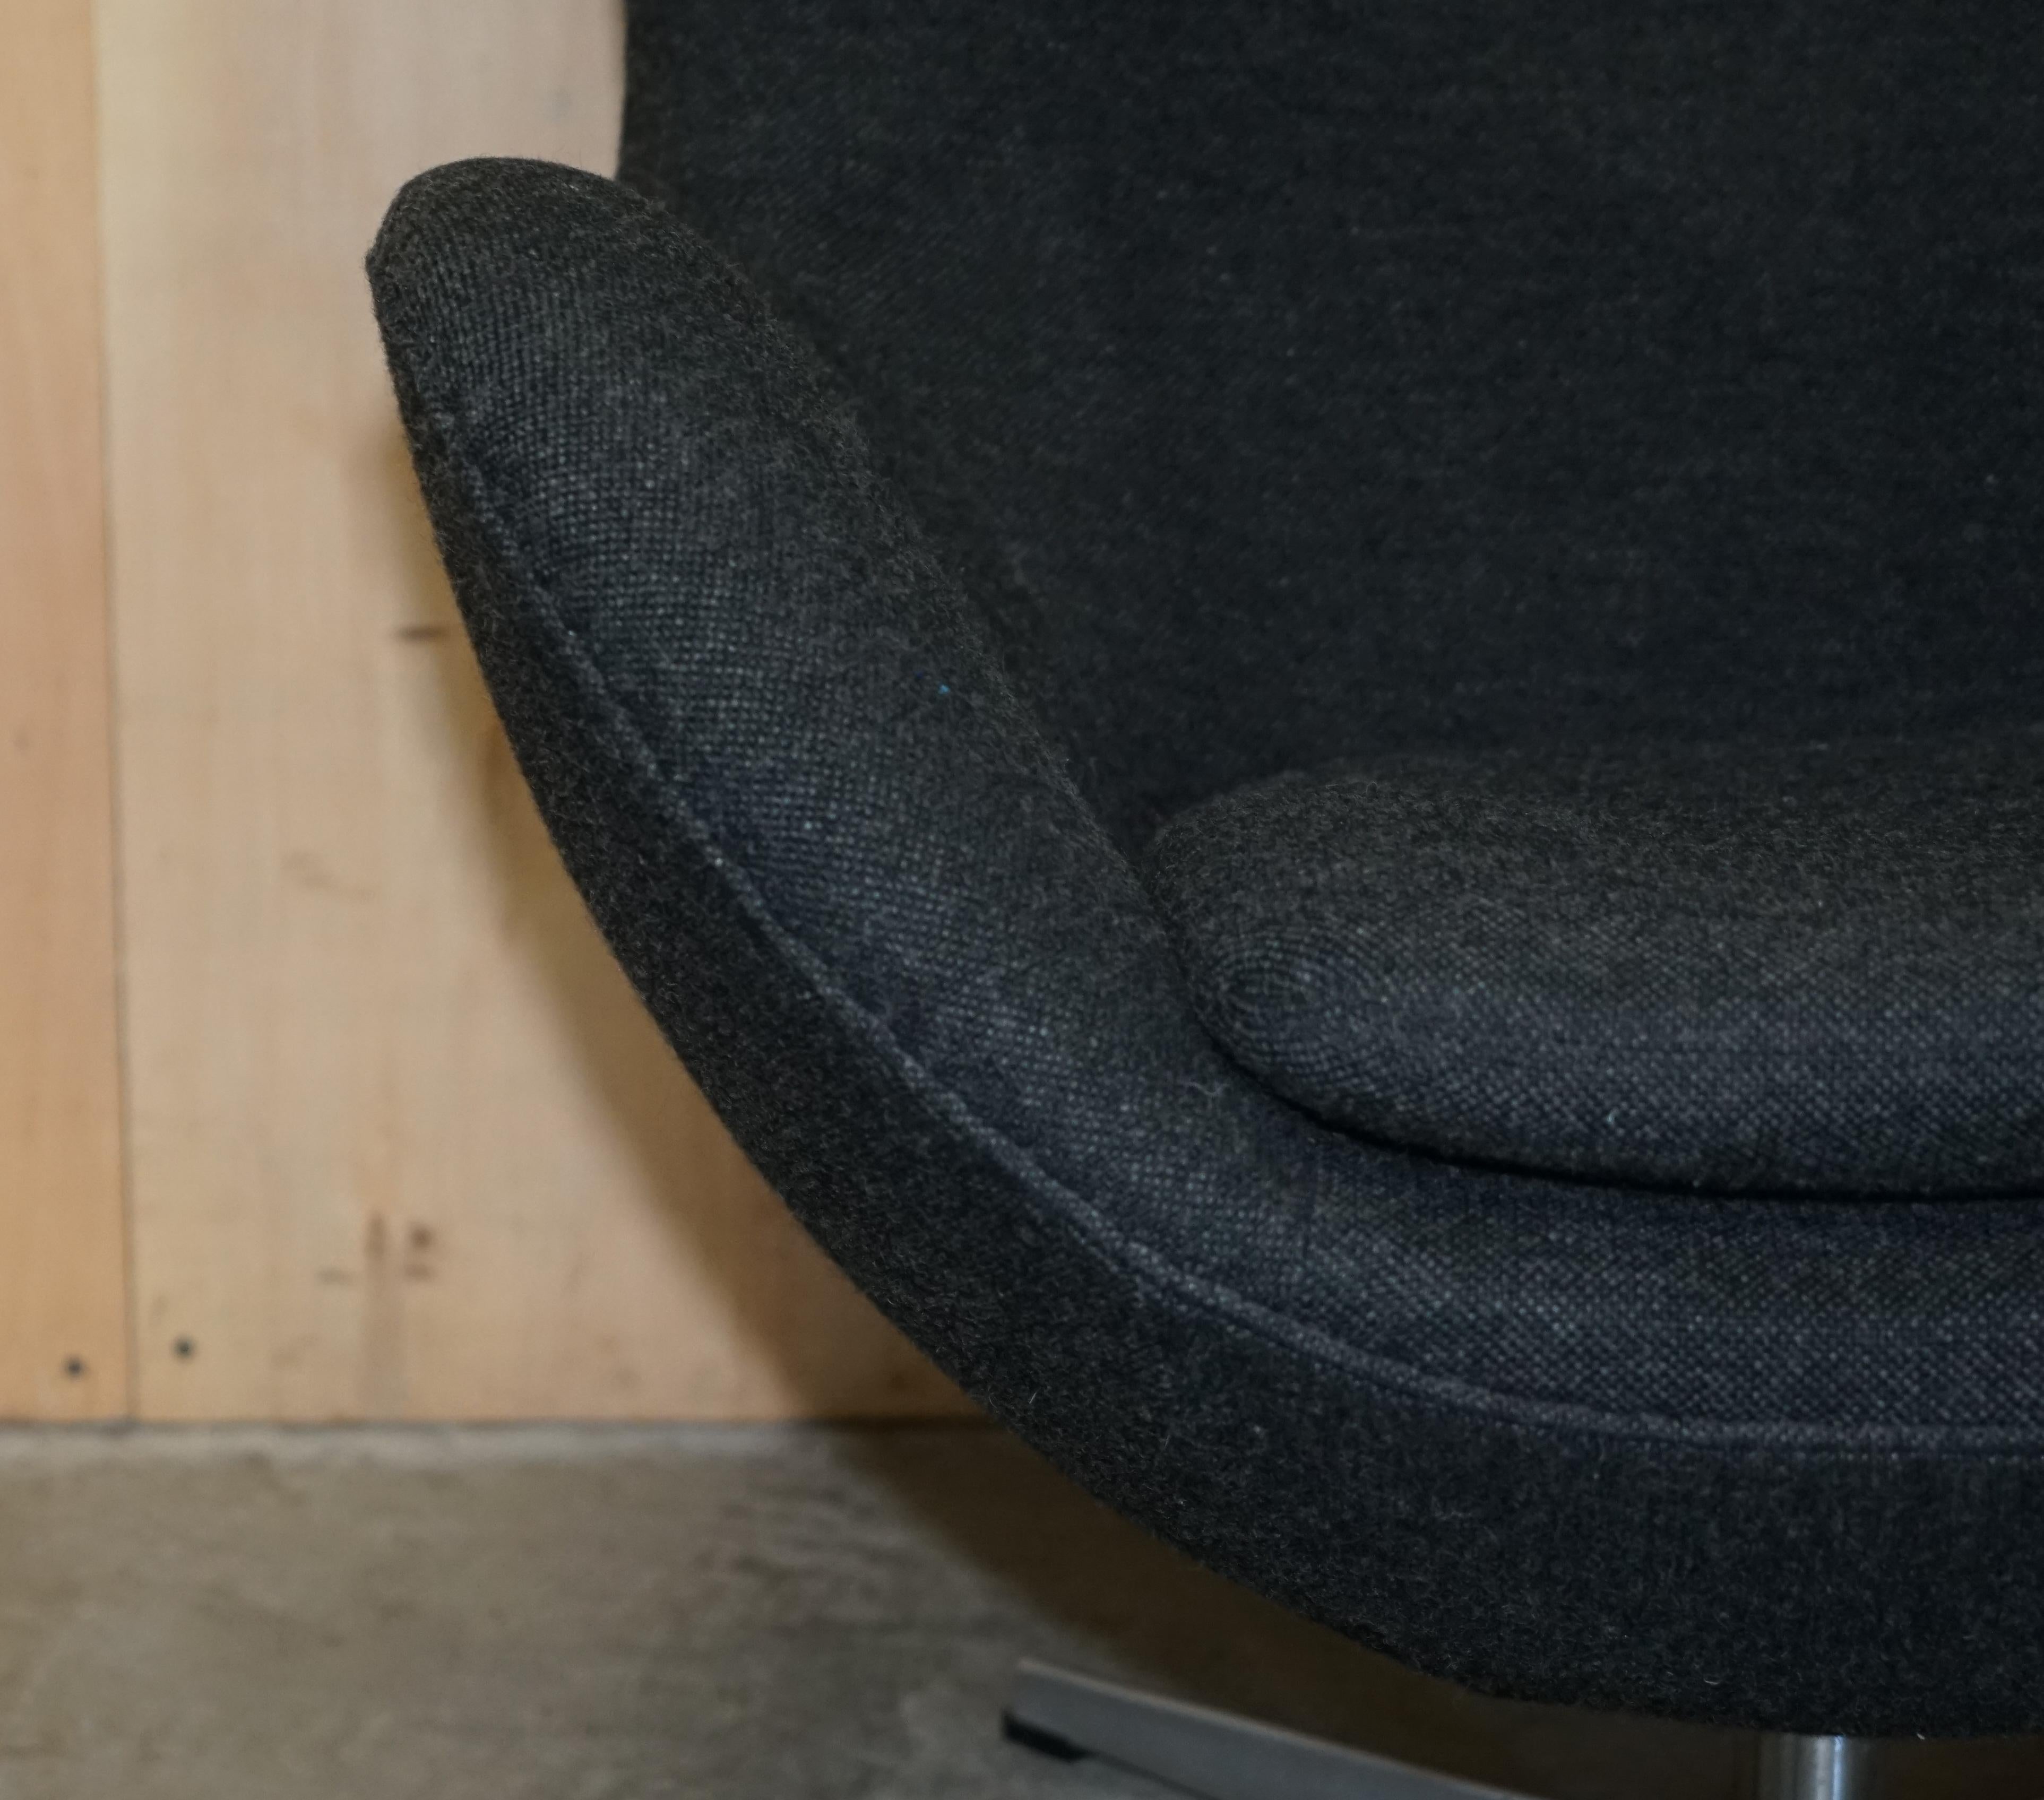 Original 1996 Stamped Fritz Hansen Egg Chair in Black / Grey Fabric For Sale 1